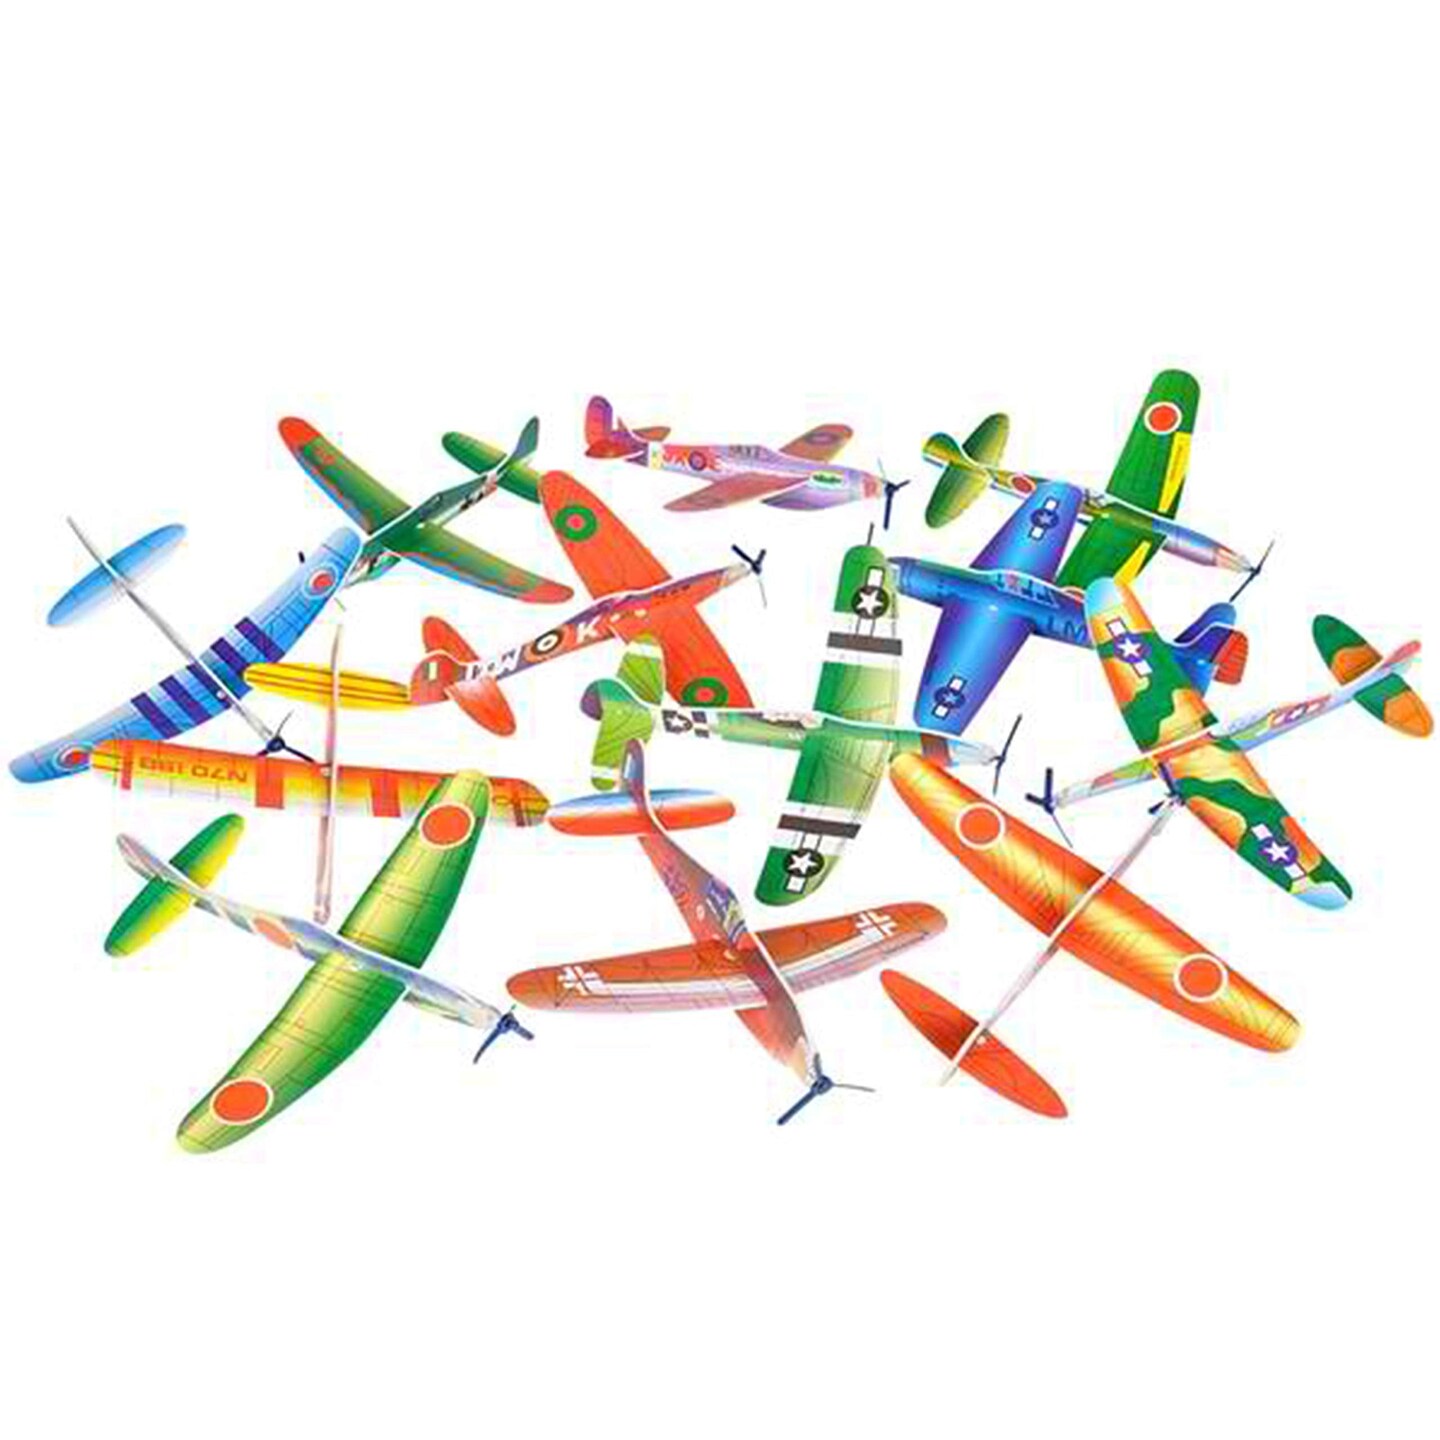 Big Mo&#x27;s Toys 24 Pack 8 Inch Glider Planes - Birthday Party Favor Plane, Great Prize, Handout Glider, Flying Models, Two Dozen